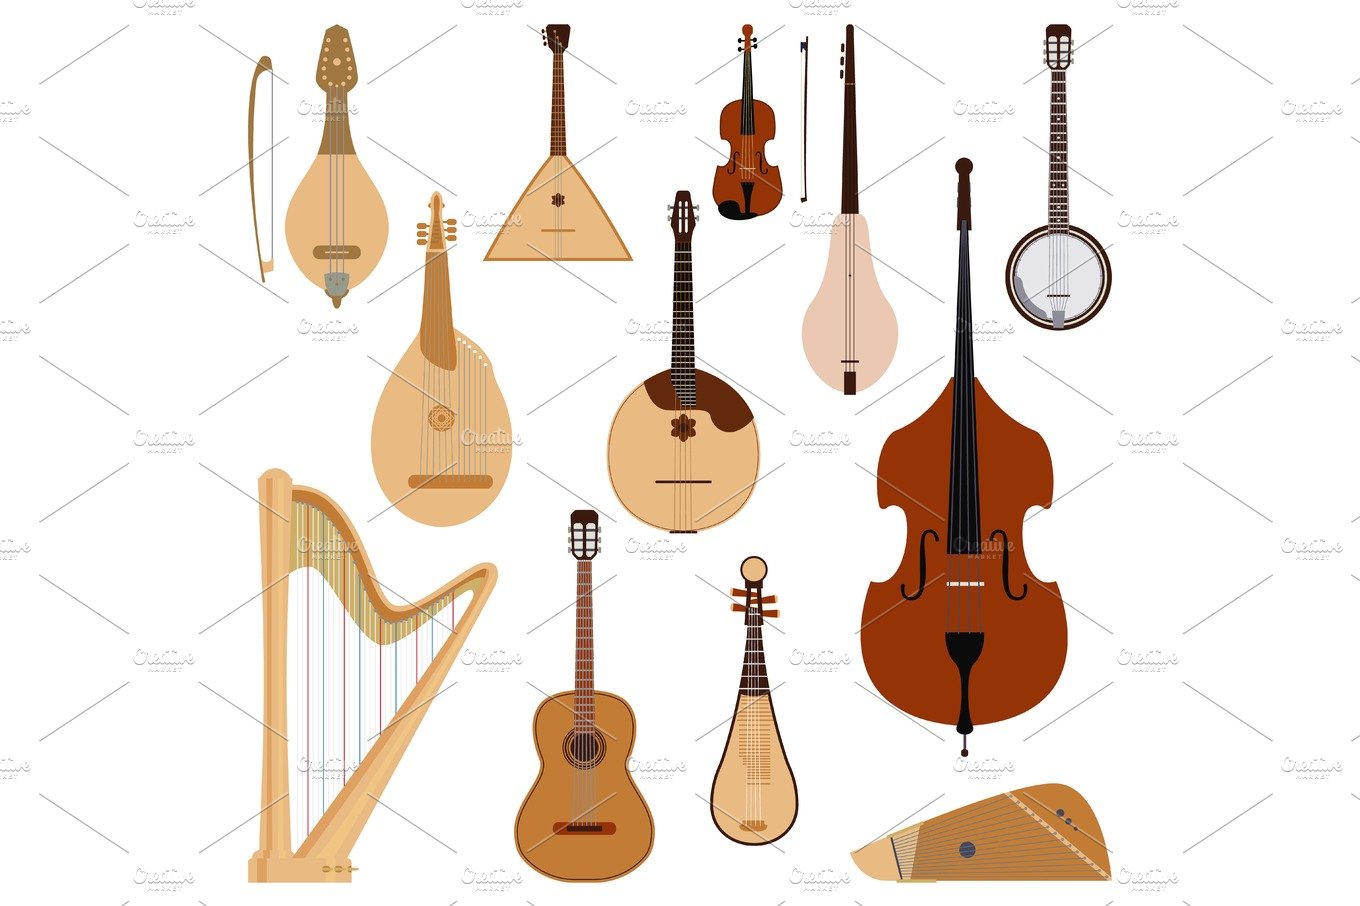 Set of stringed dreamed musical instruments classical orchestra art sound t... cover image.